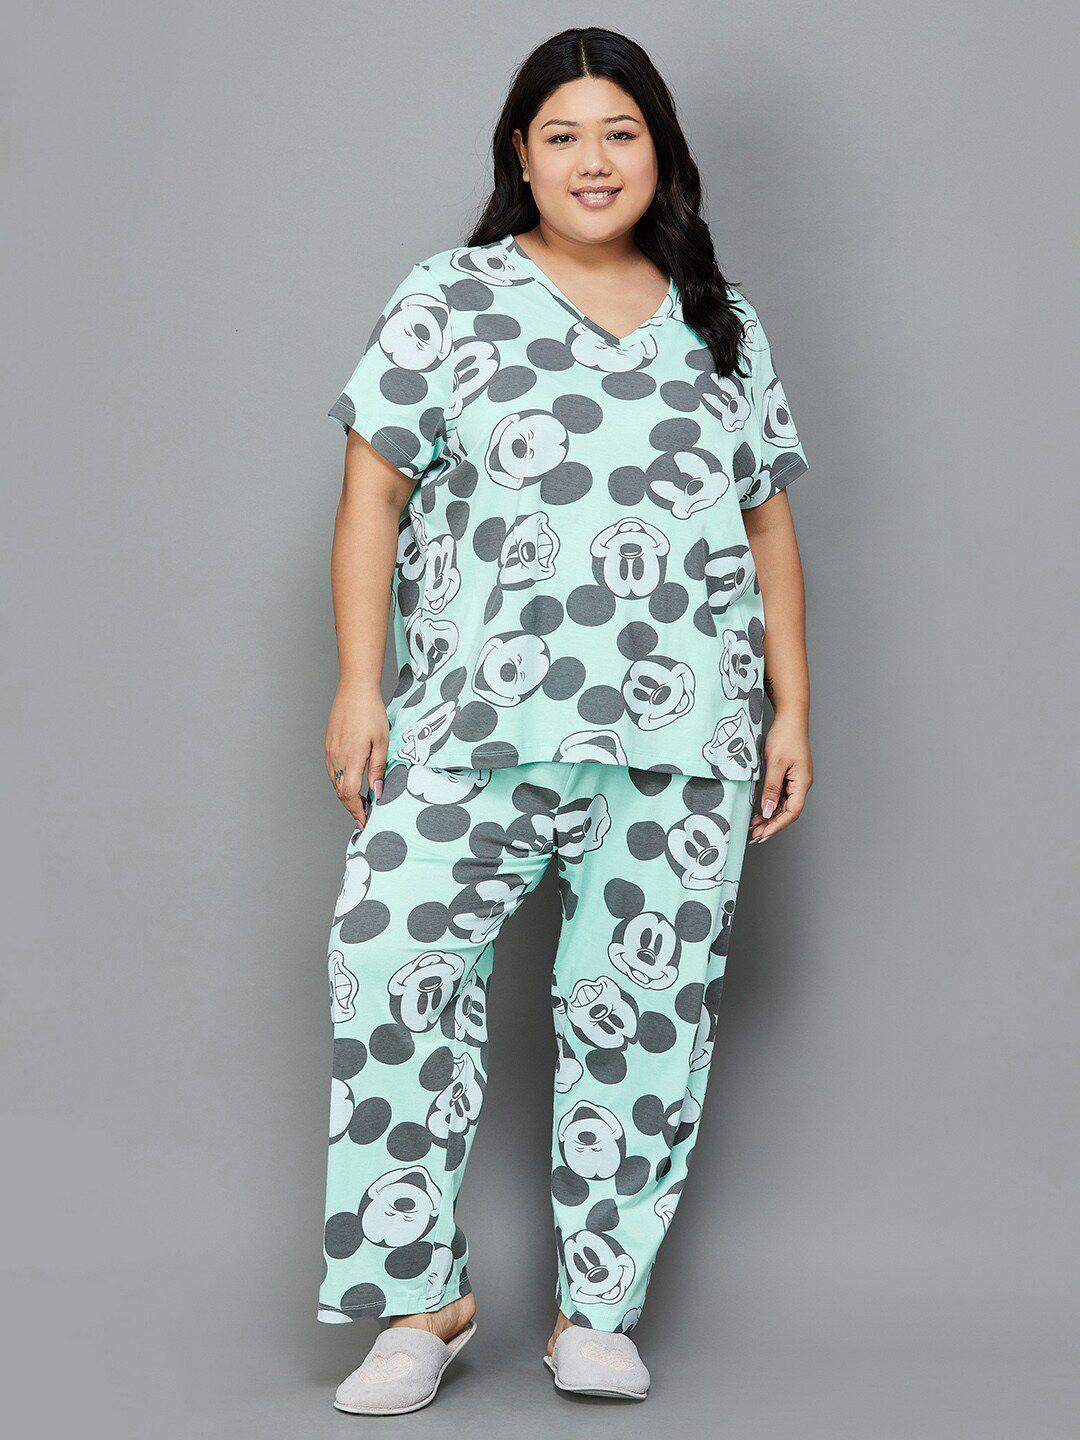 nexus by lifestyle plus size mickey mouse printed night suit